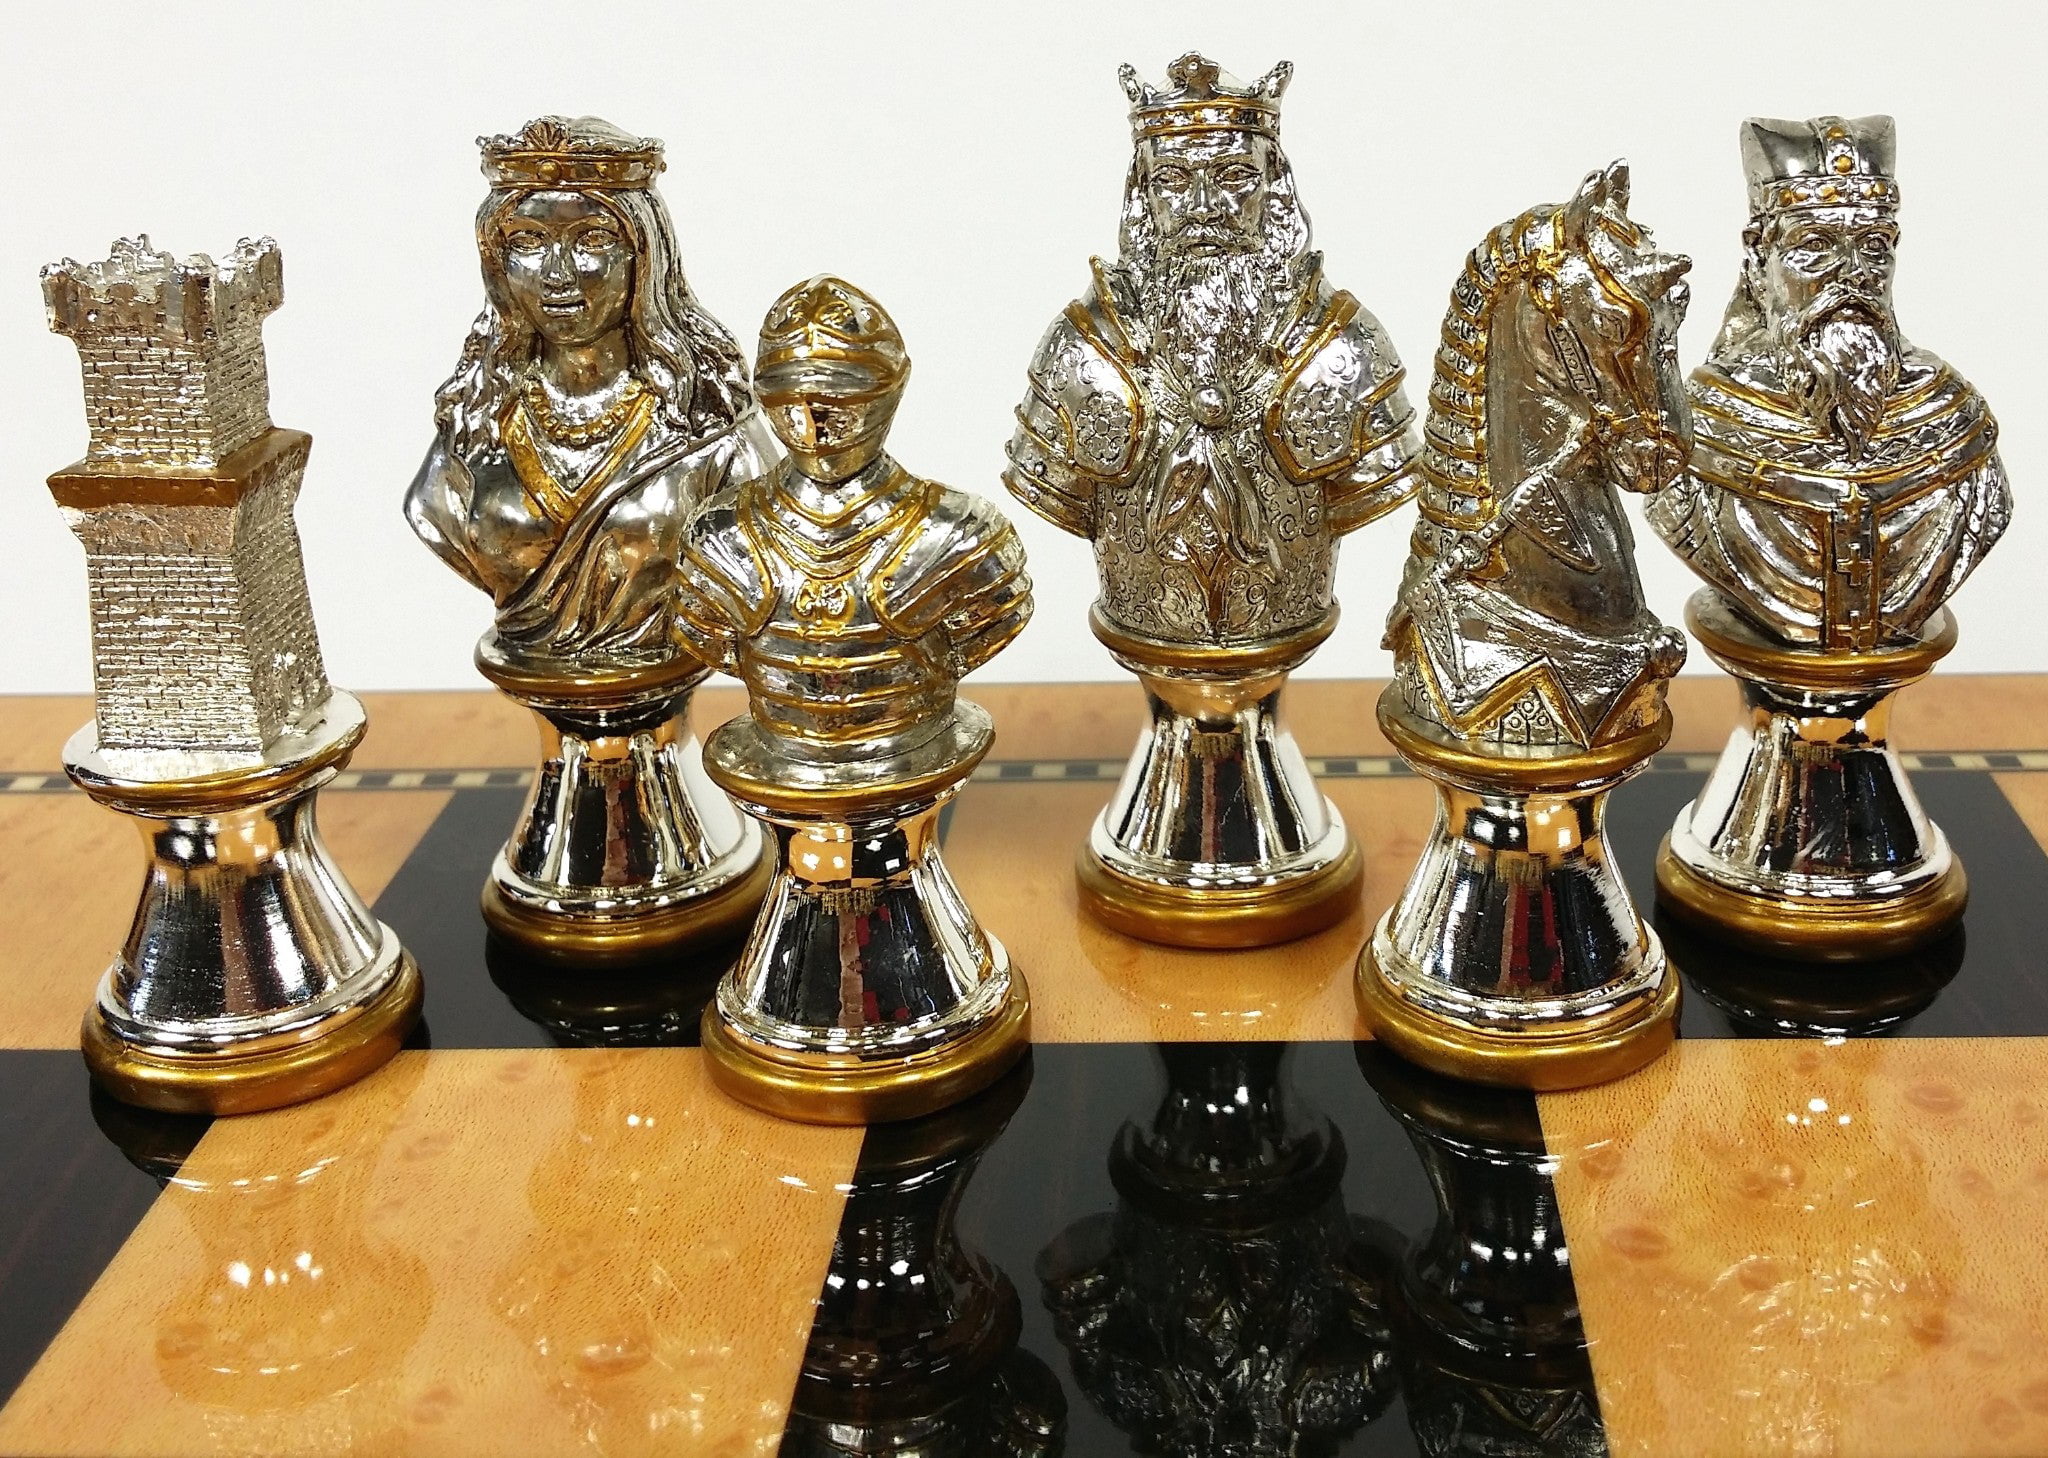 METAL Medieval Times Crusades Gold Silver Busts Chess Set Walnut